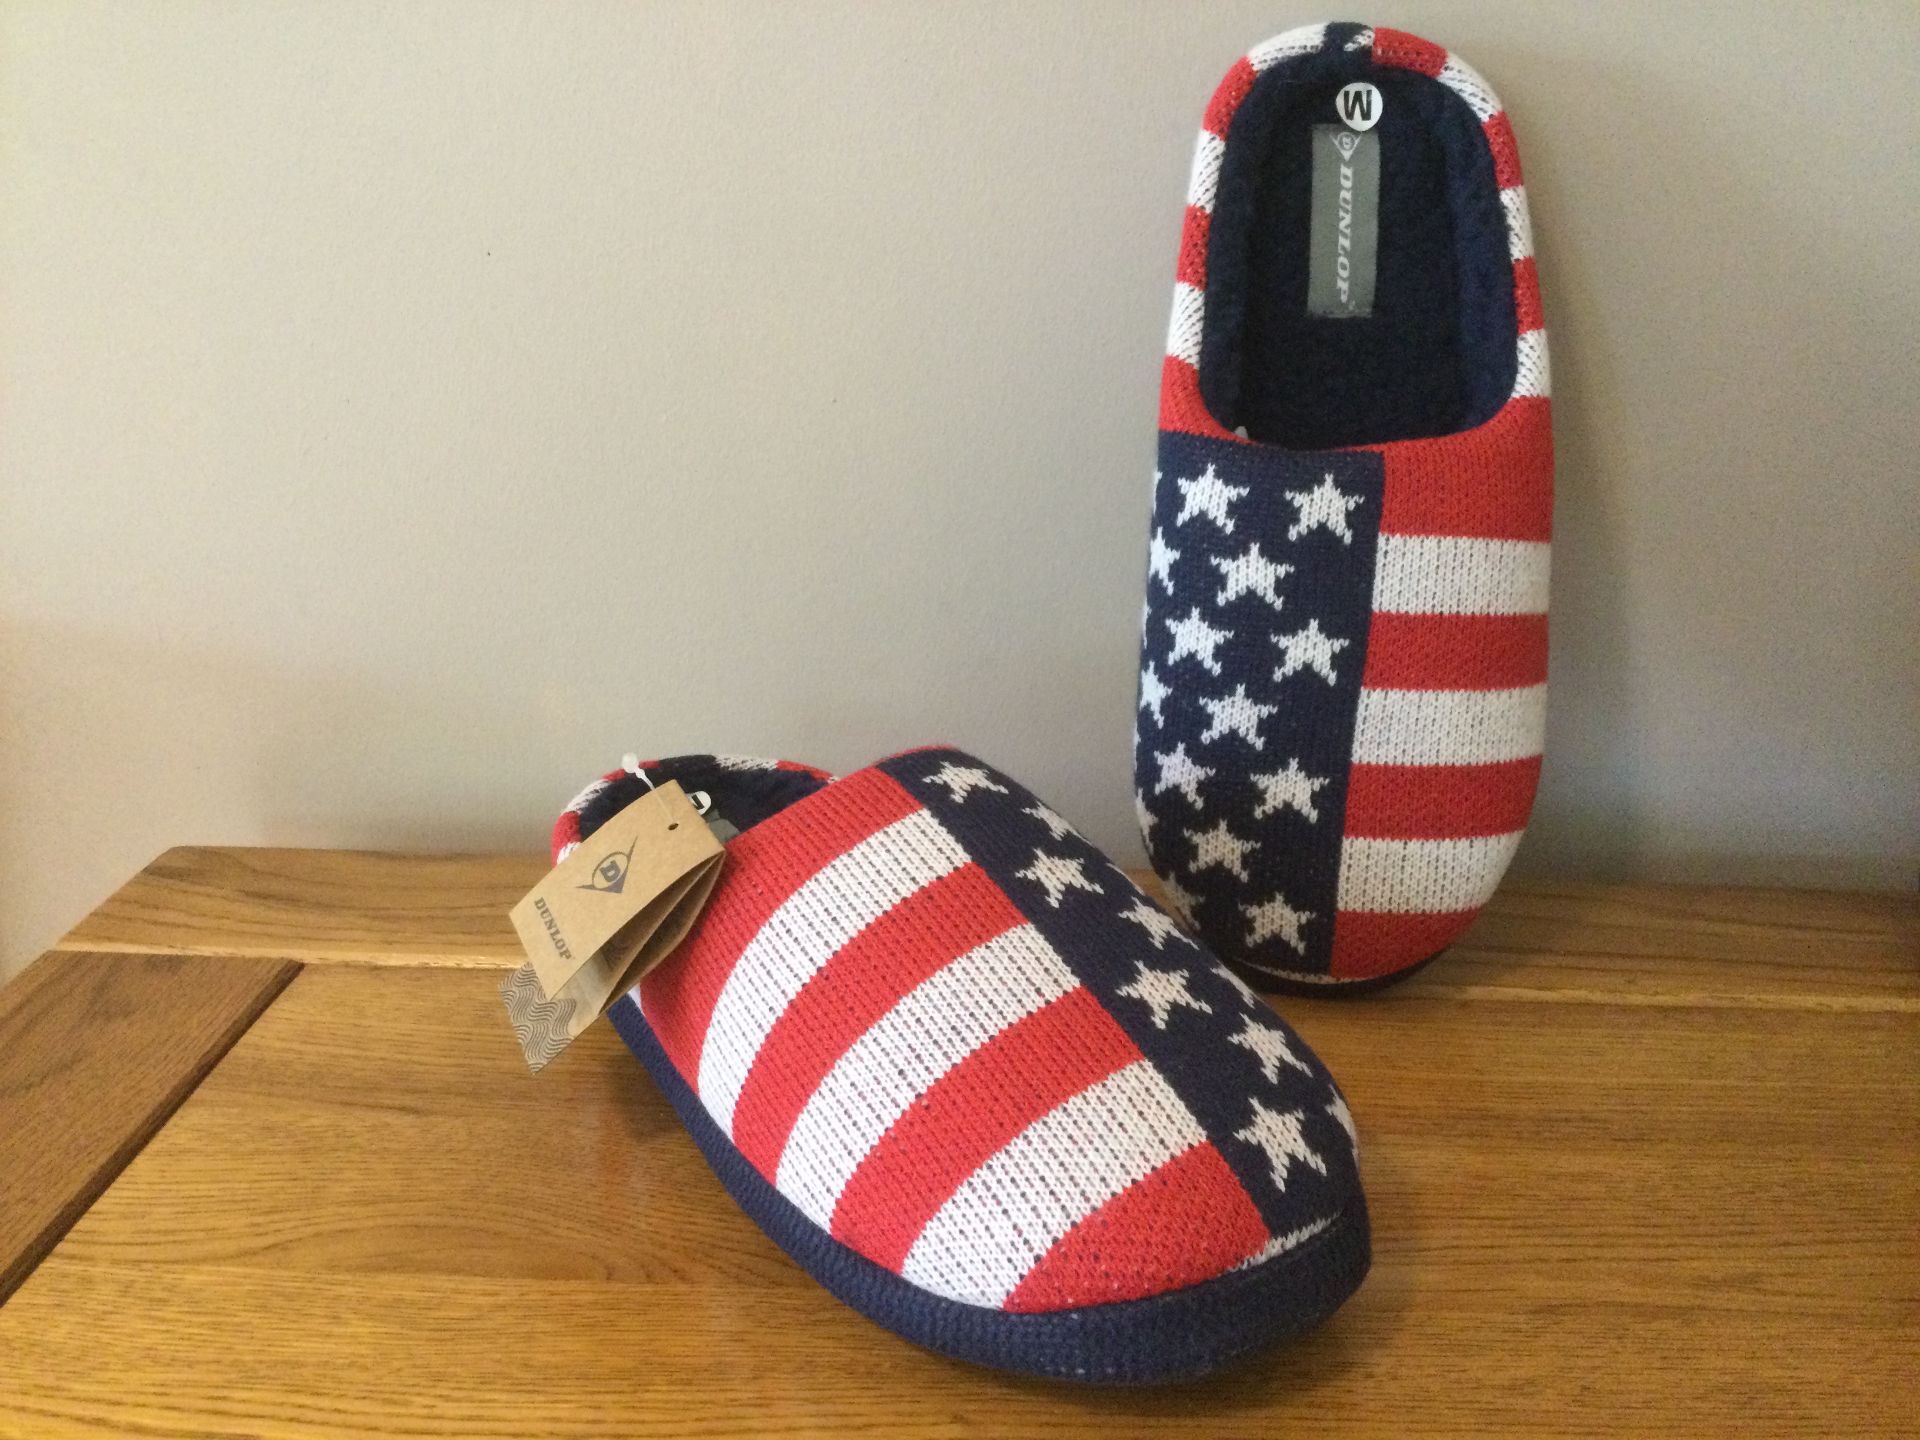 Men's Dunlop, “USA Stars and Stripes” Memory Foam, Mule Slippers, Size M (8/9) - New - Image 3 of 5